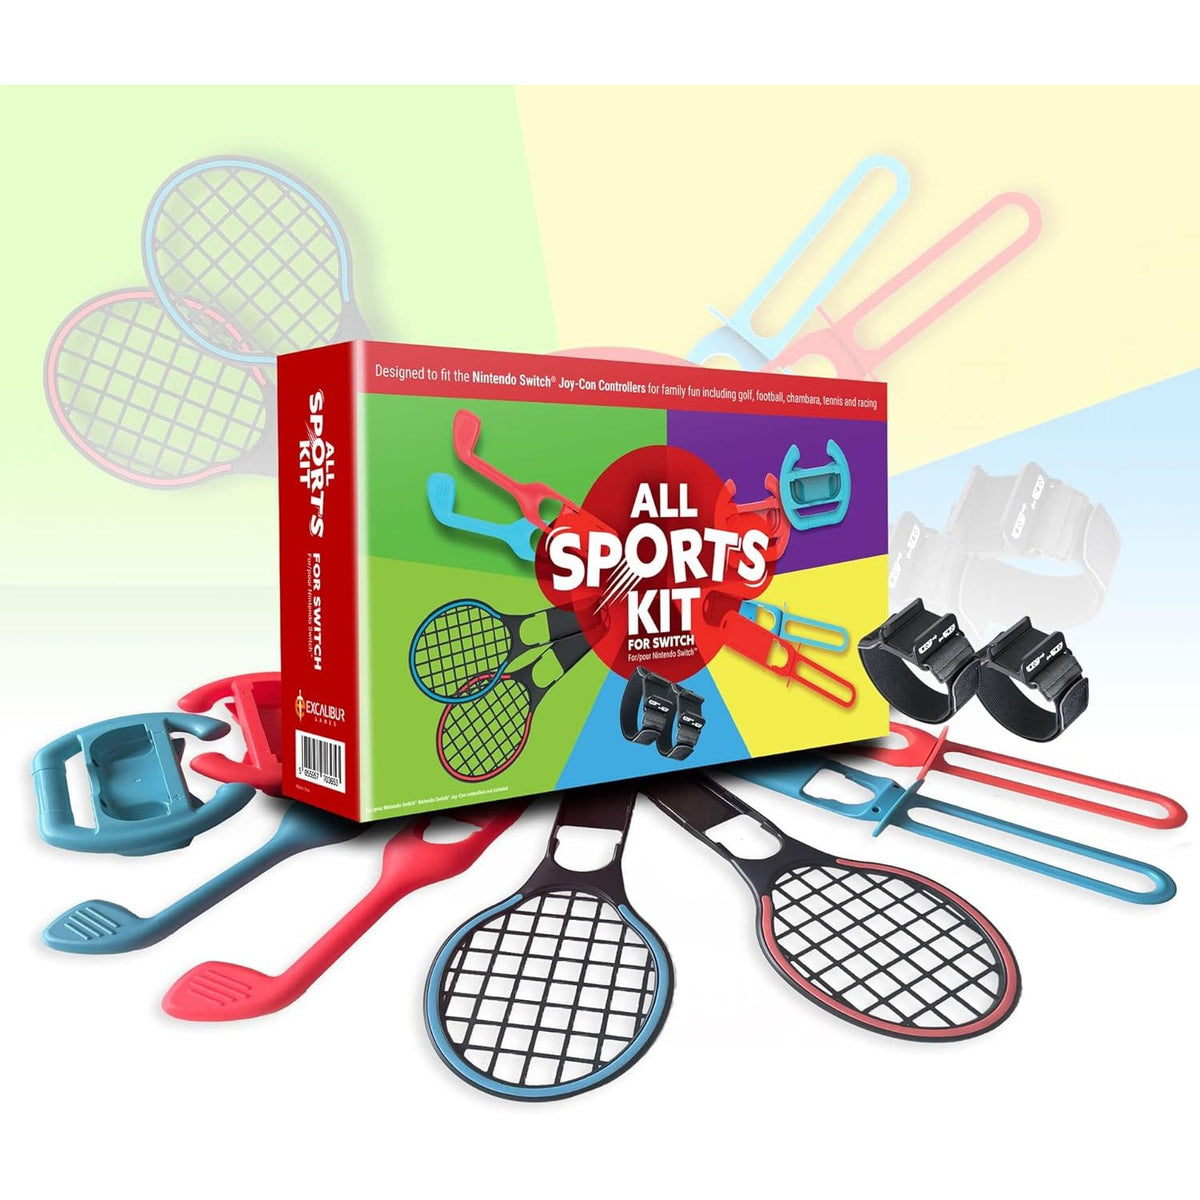 All Sports 10 in 1 Kit for Switch - Racing Wheels, Tennis Rackets, Golf Clubs, Leg/Arm Straps & Swords Nintendo Switch